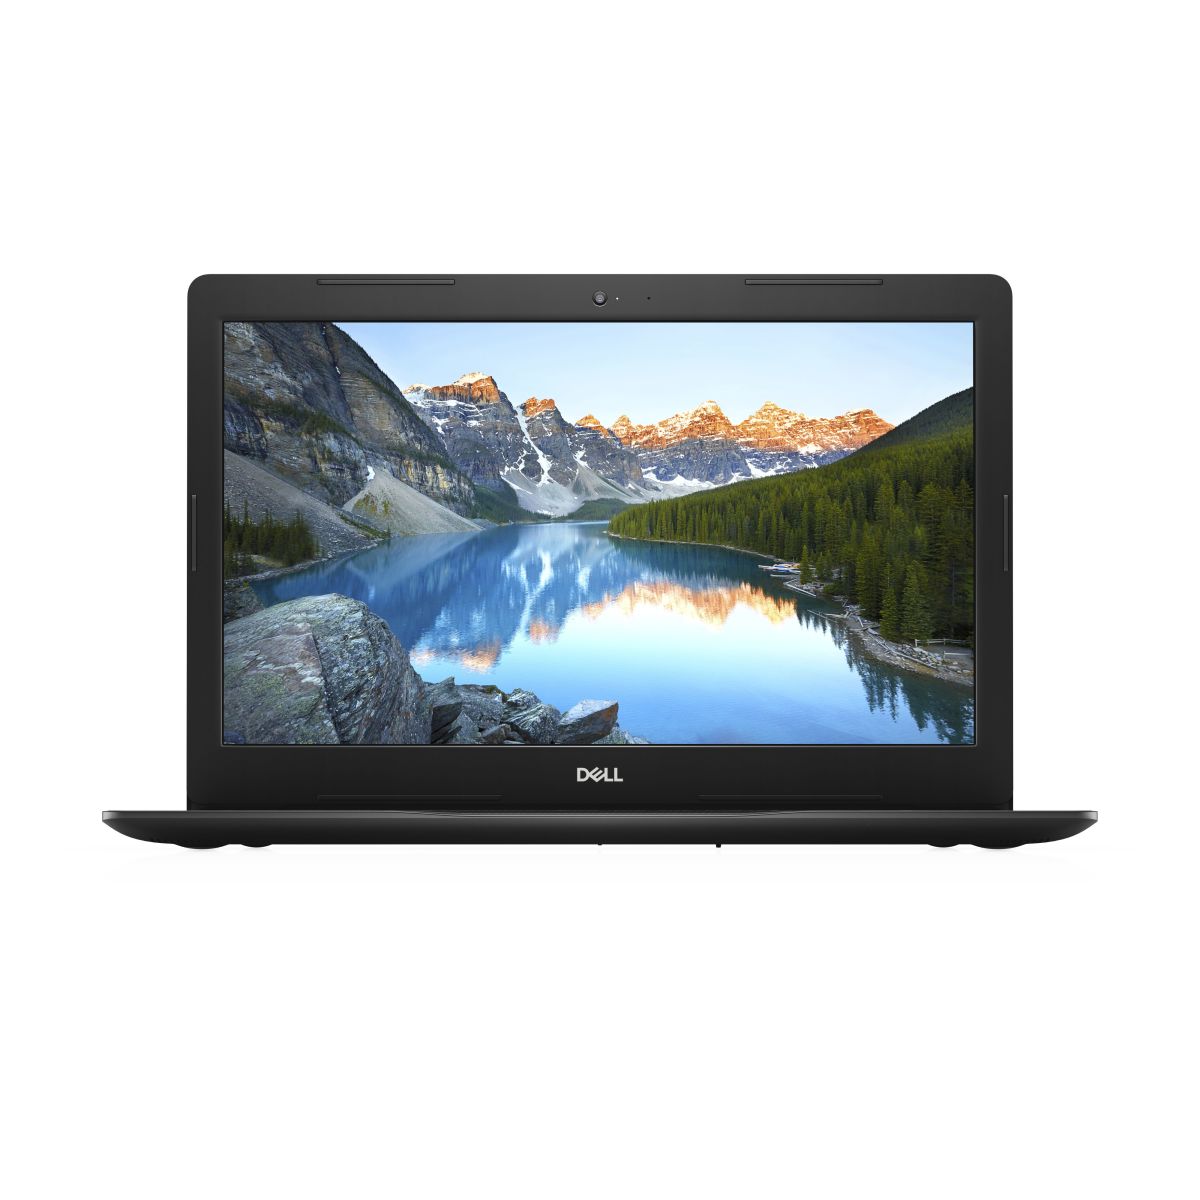 DELL Inspiron 3582 - 3582-5798 laptop specifications